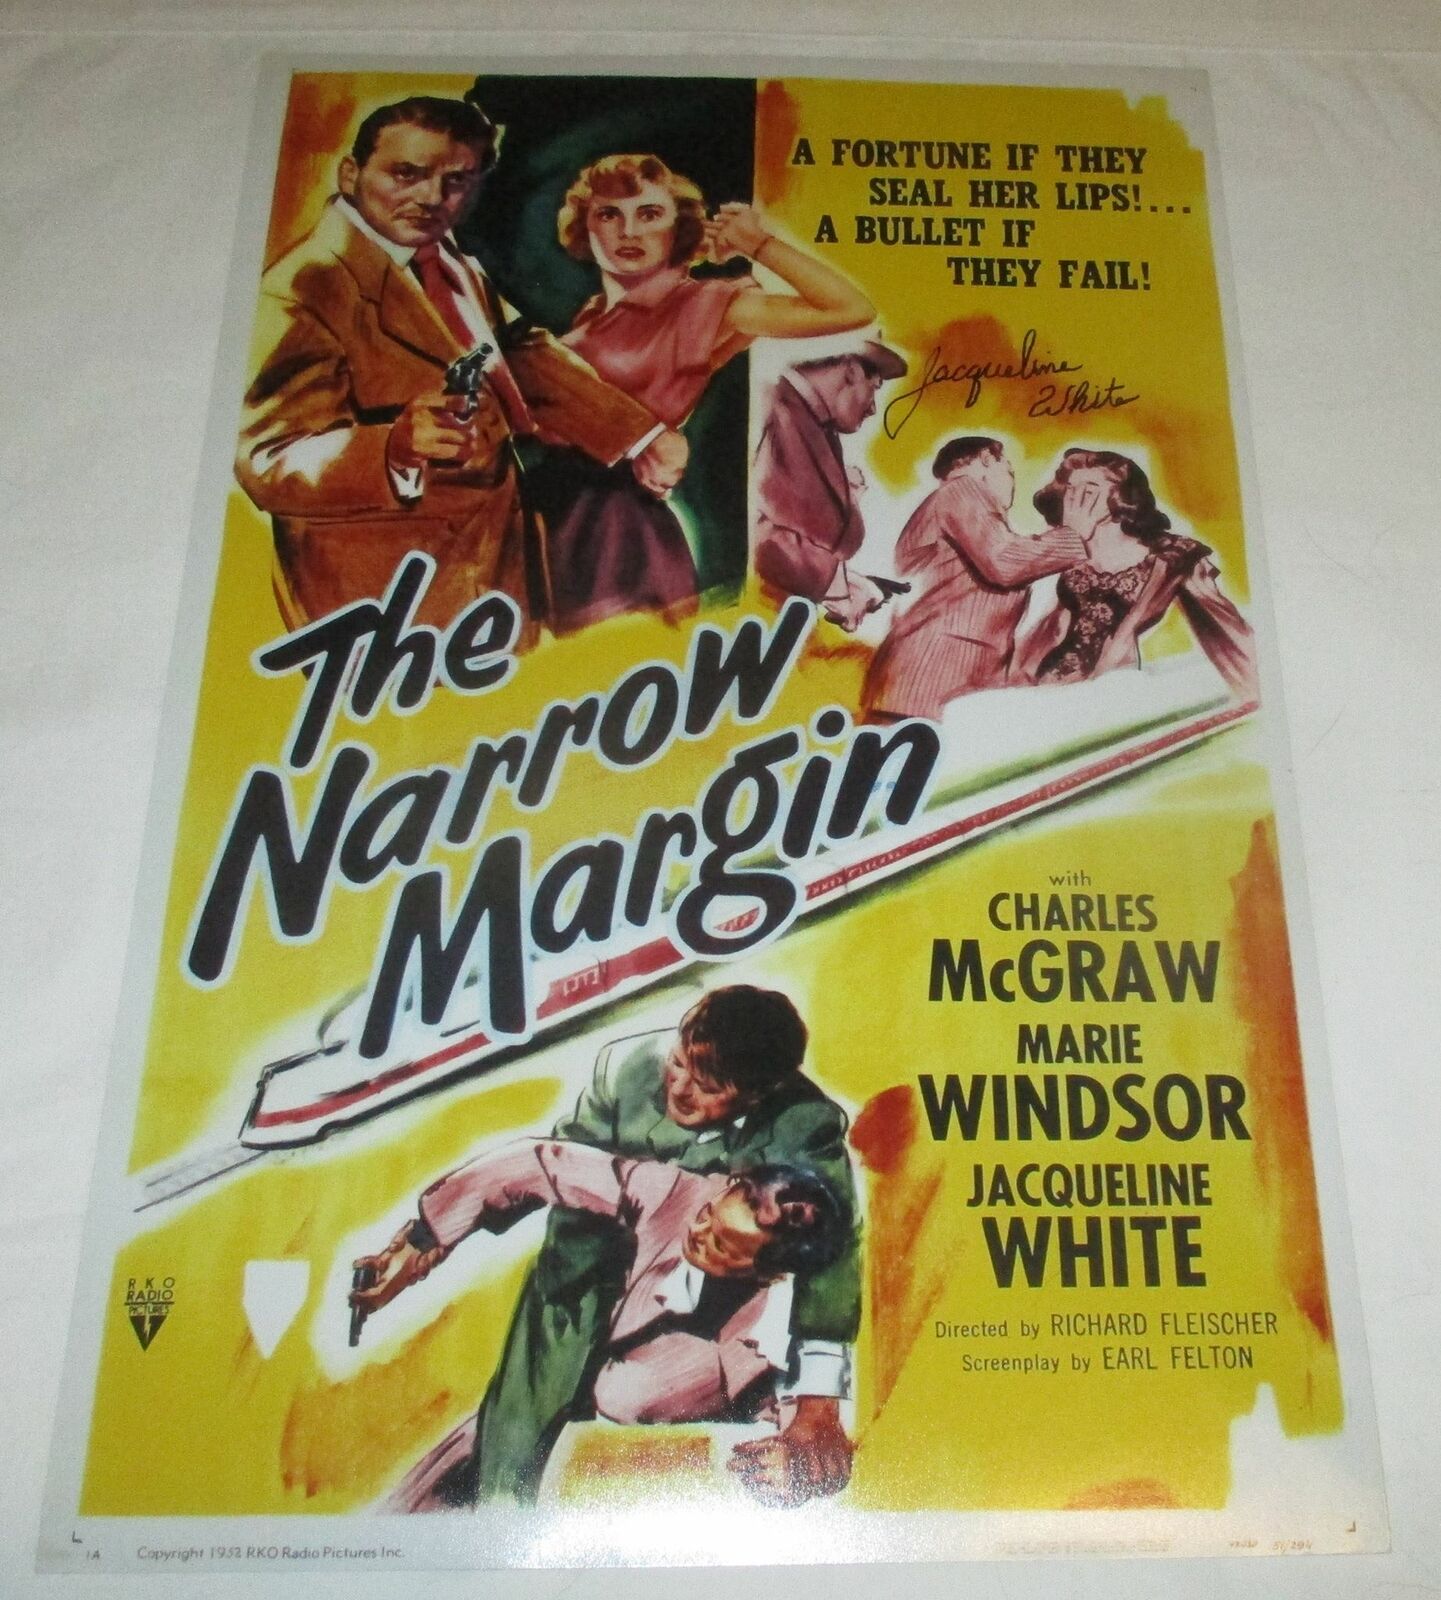 JACQUELINE WHITE SIGNED THE NARROW MARGIN 12X18 MOVIE POSTER